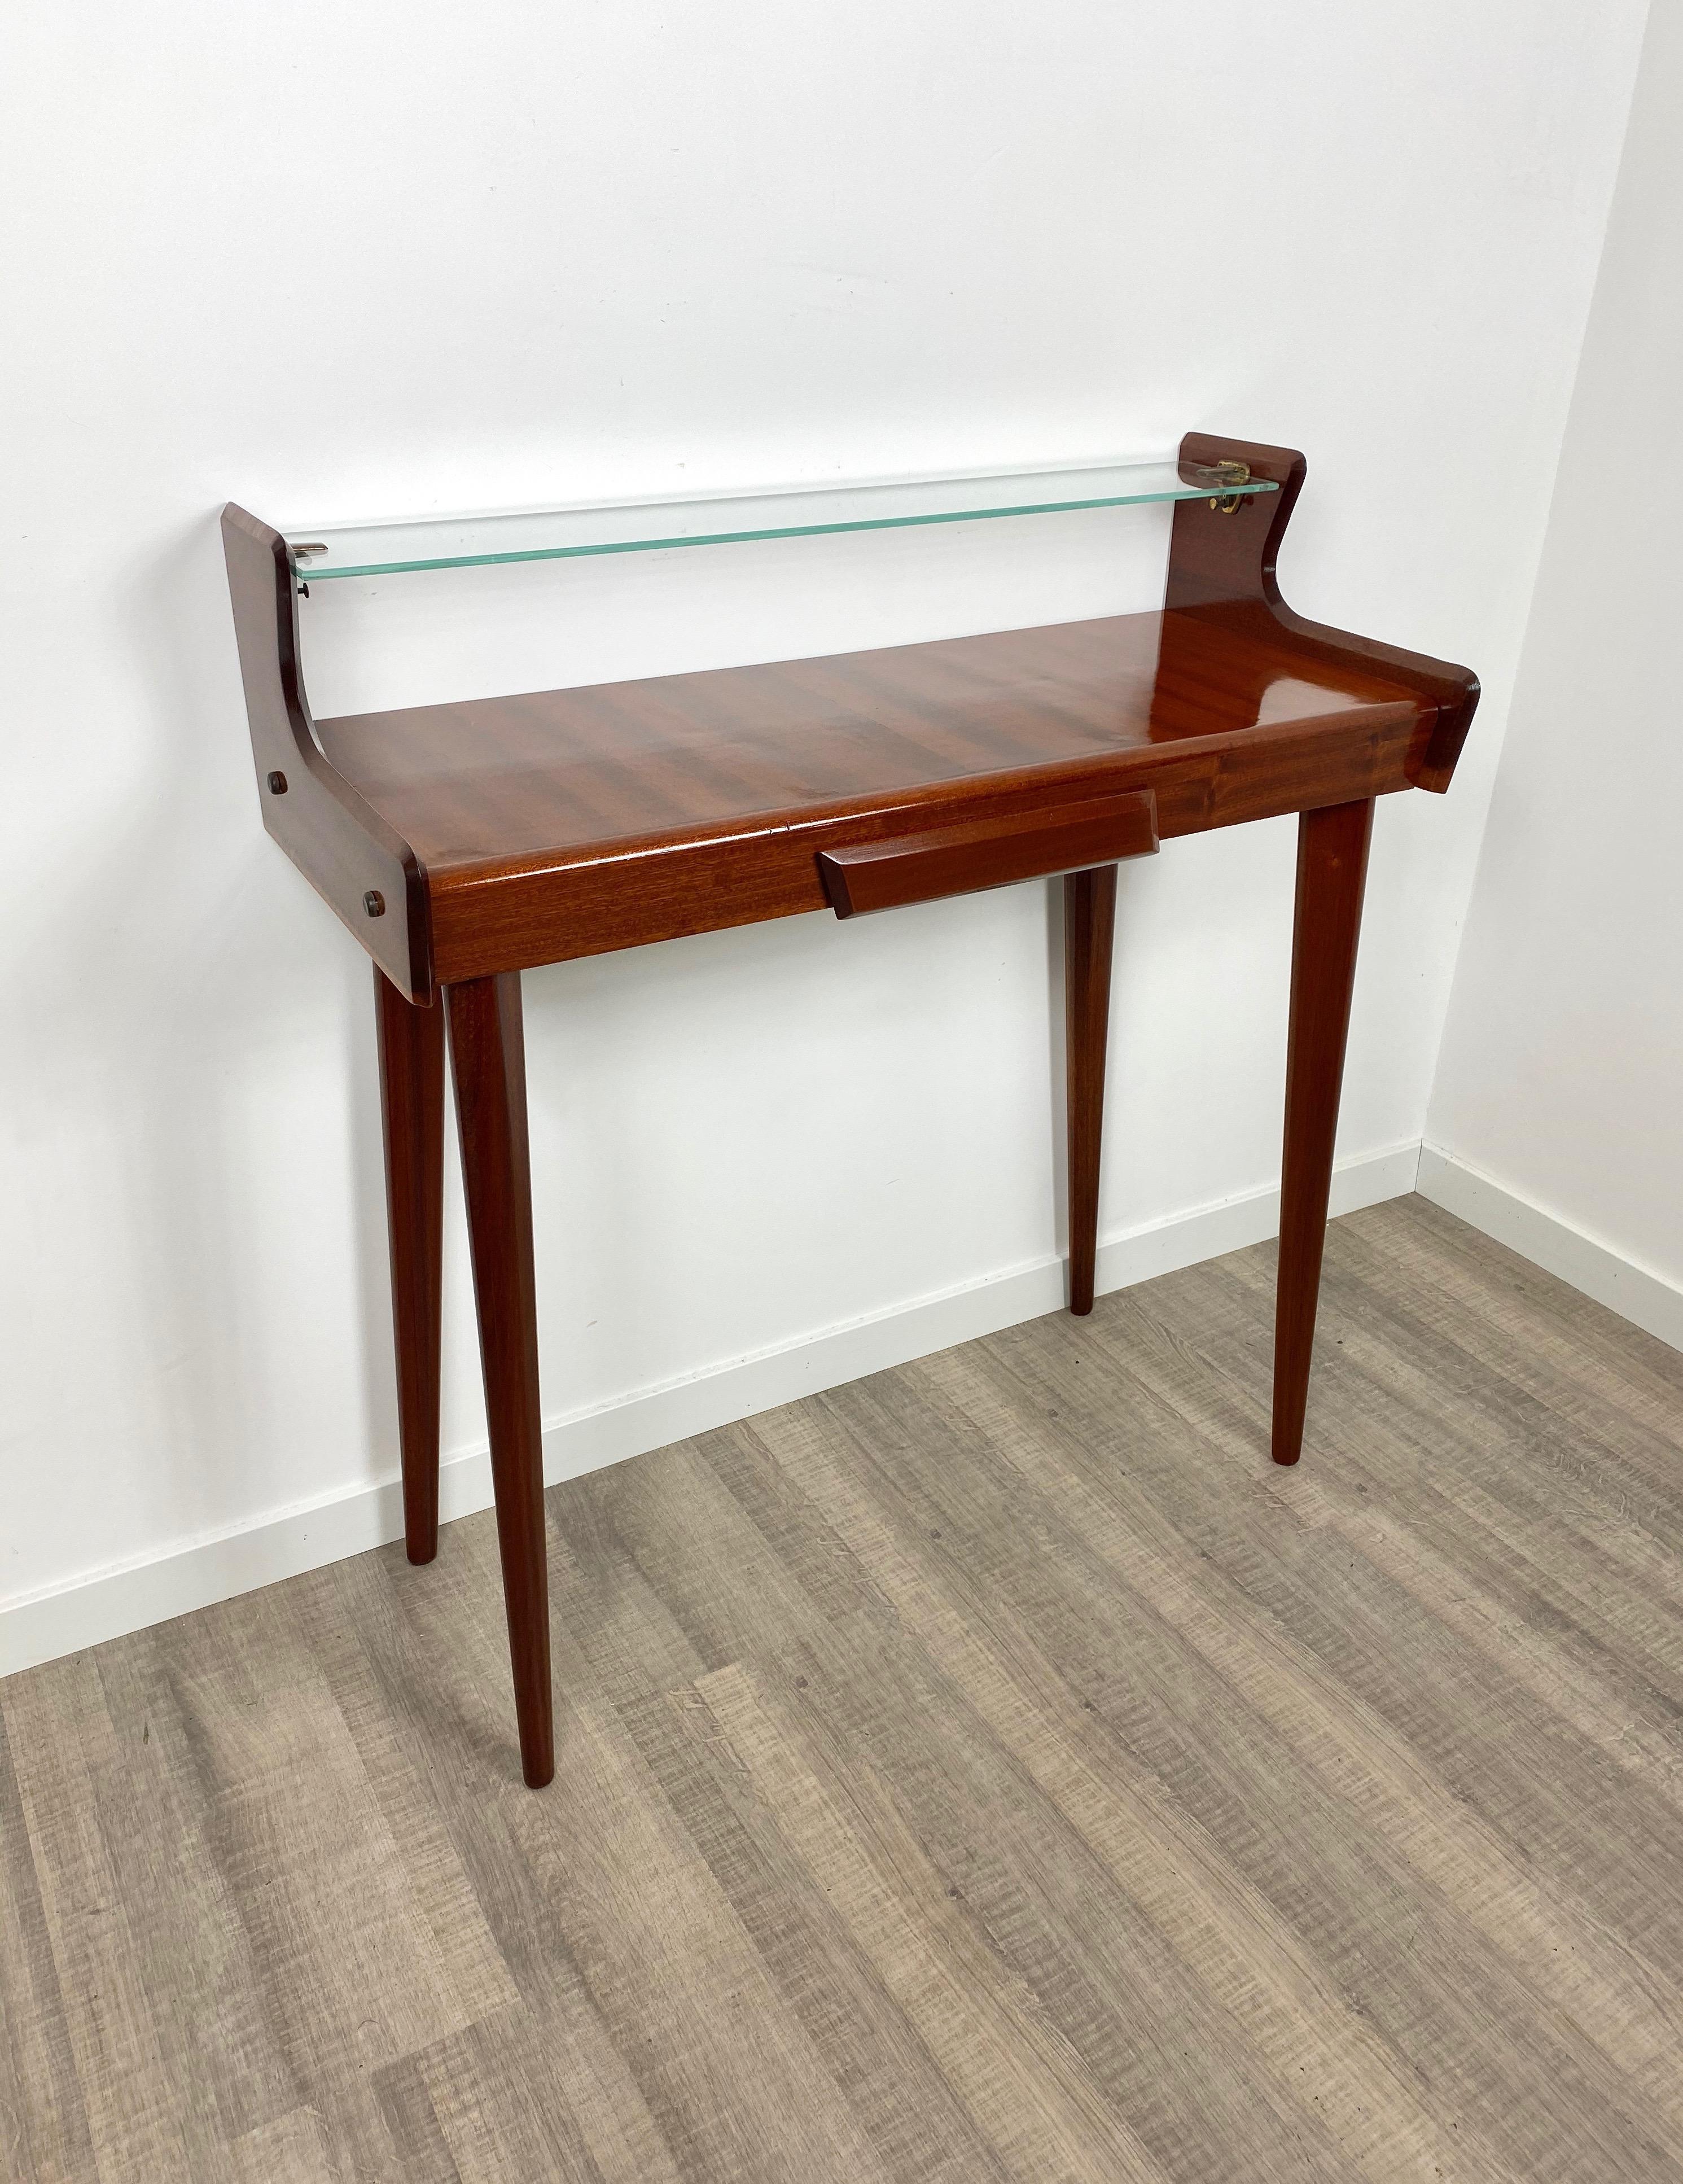 Italian Midcentury Mahogany Wood and Glass Console Table by Carlo de Carli 1950s In Good Condition For Sale In Rome, IT